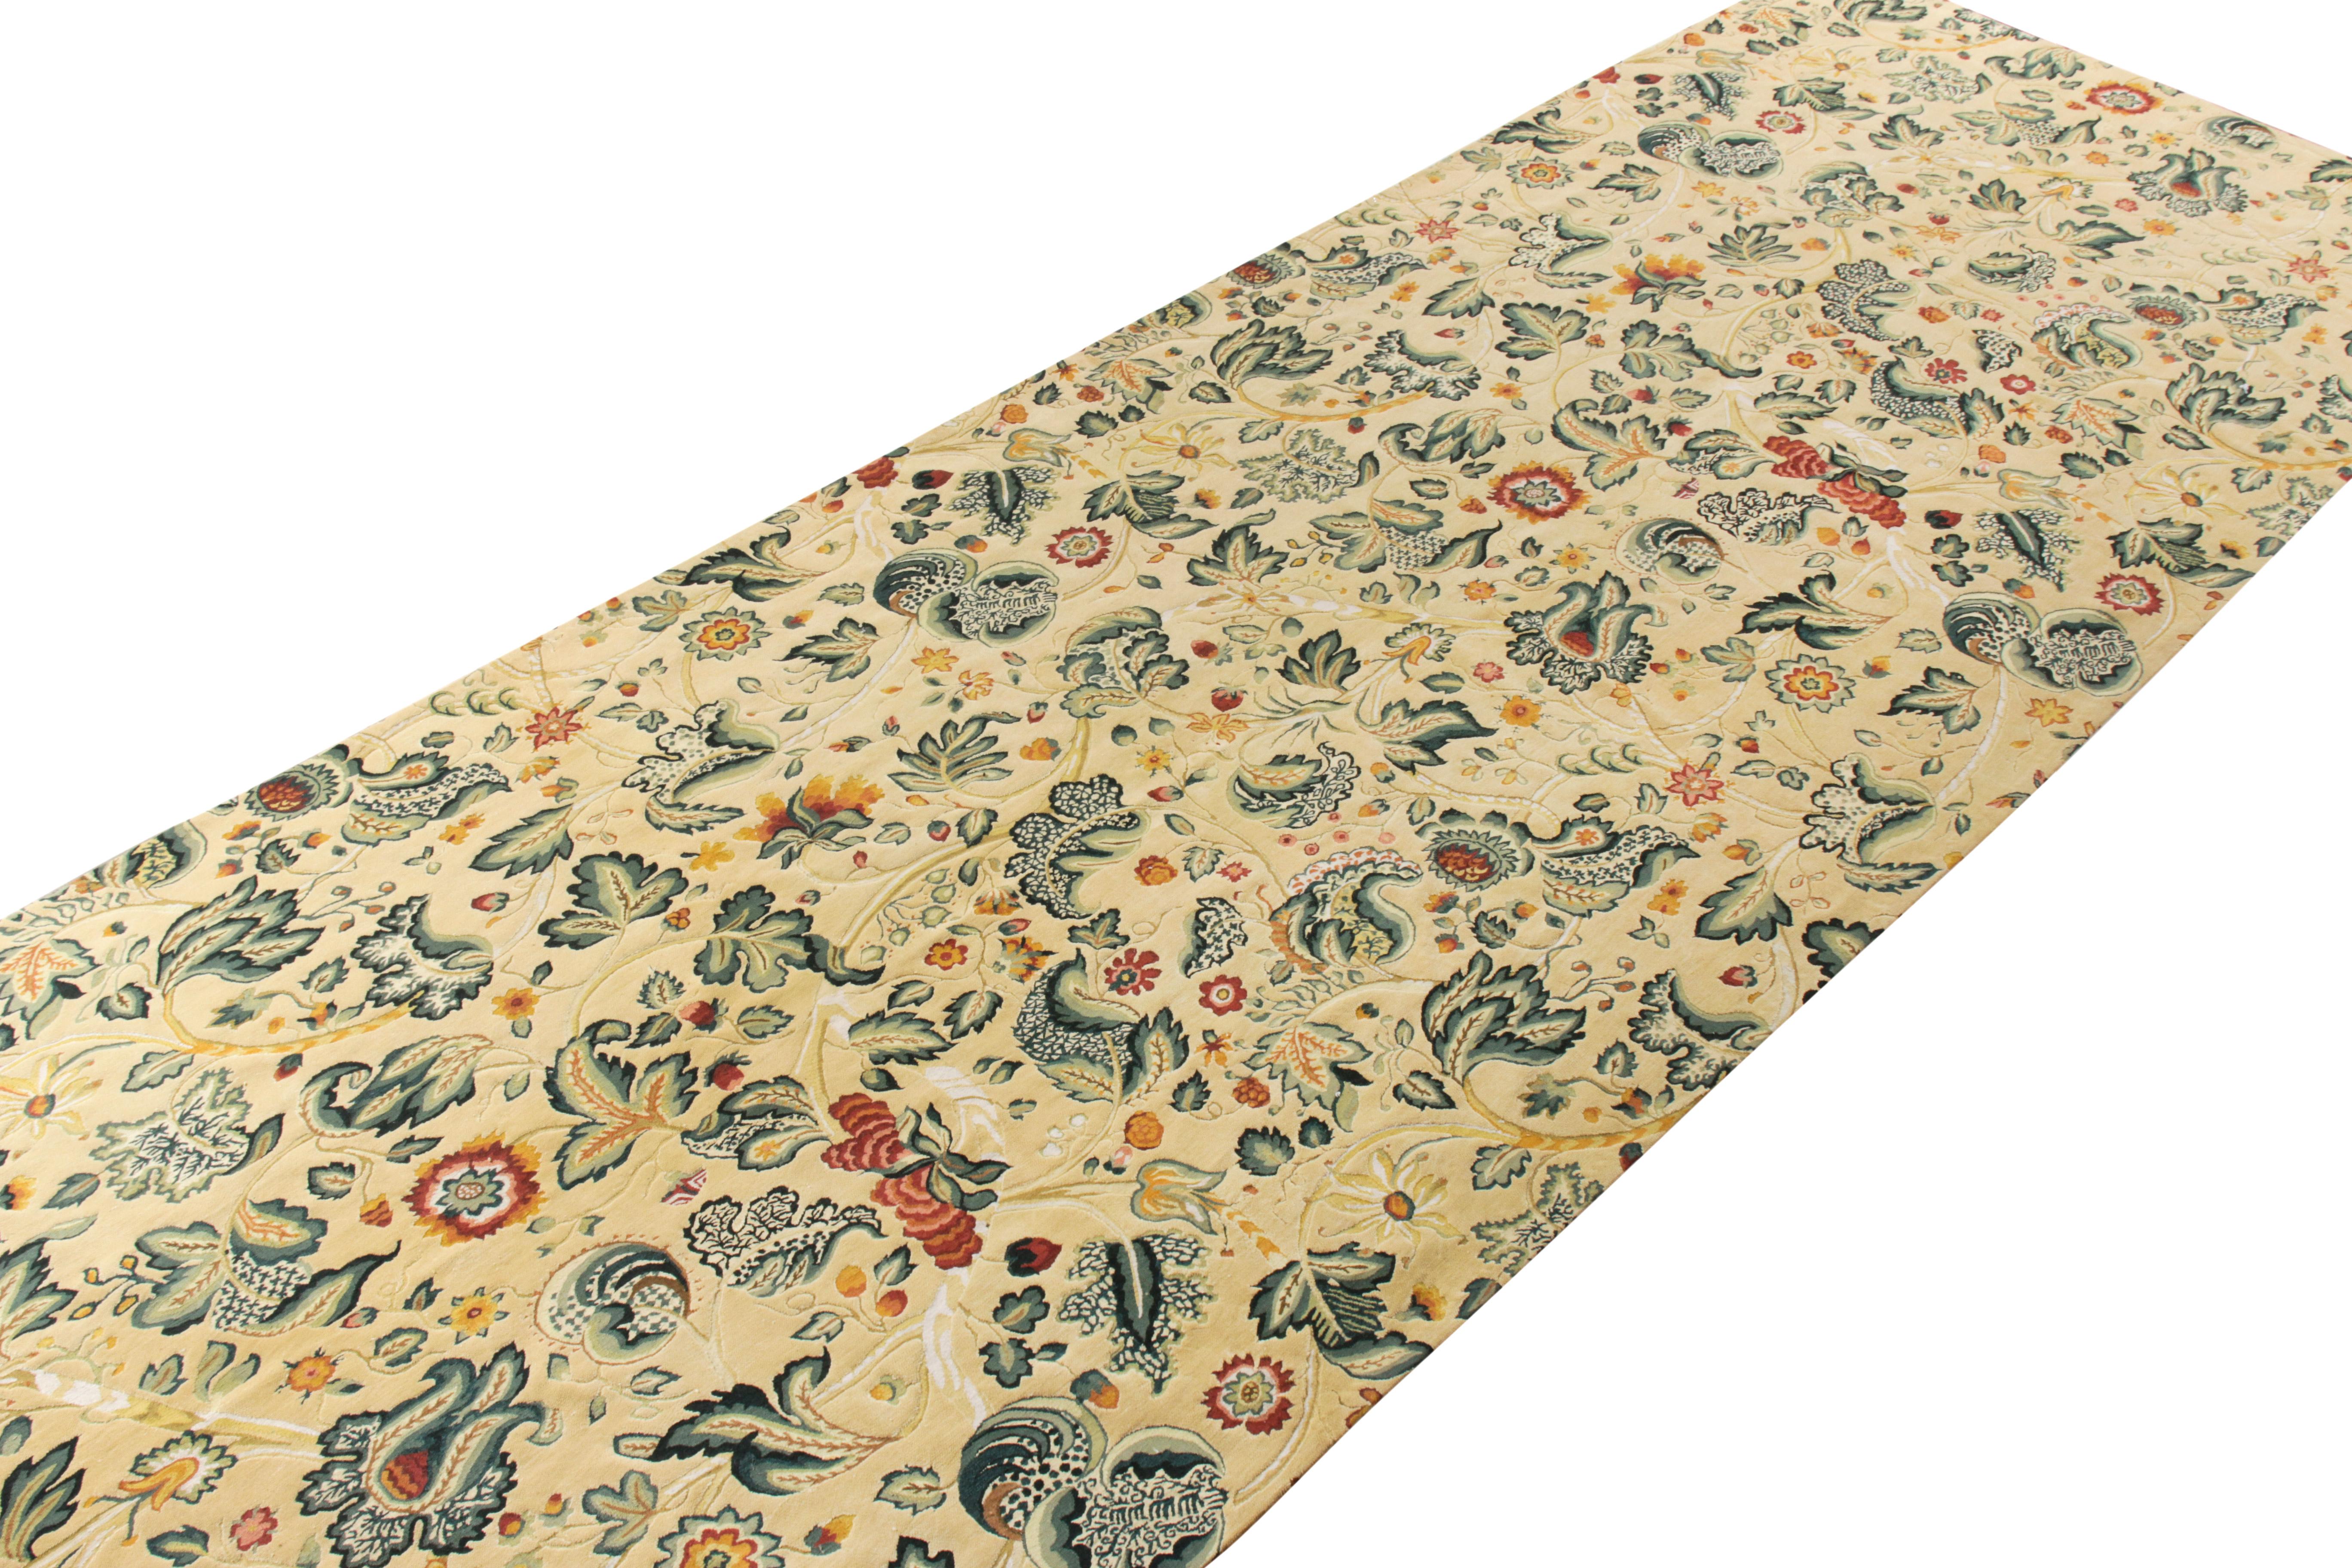 Chinese Rug & Kilim’s Tudor Style Gallery Rug in Cream, Green All over Floral Pattern For Sale